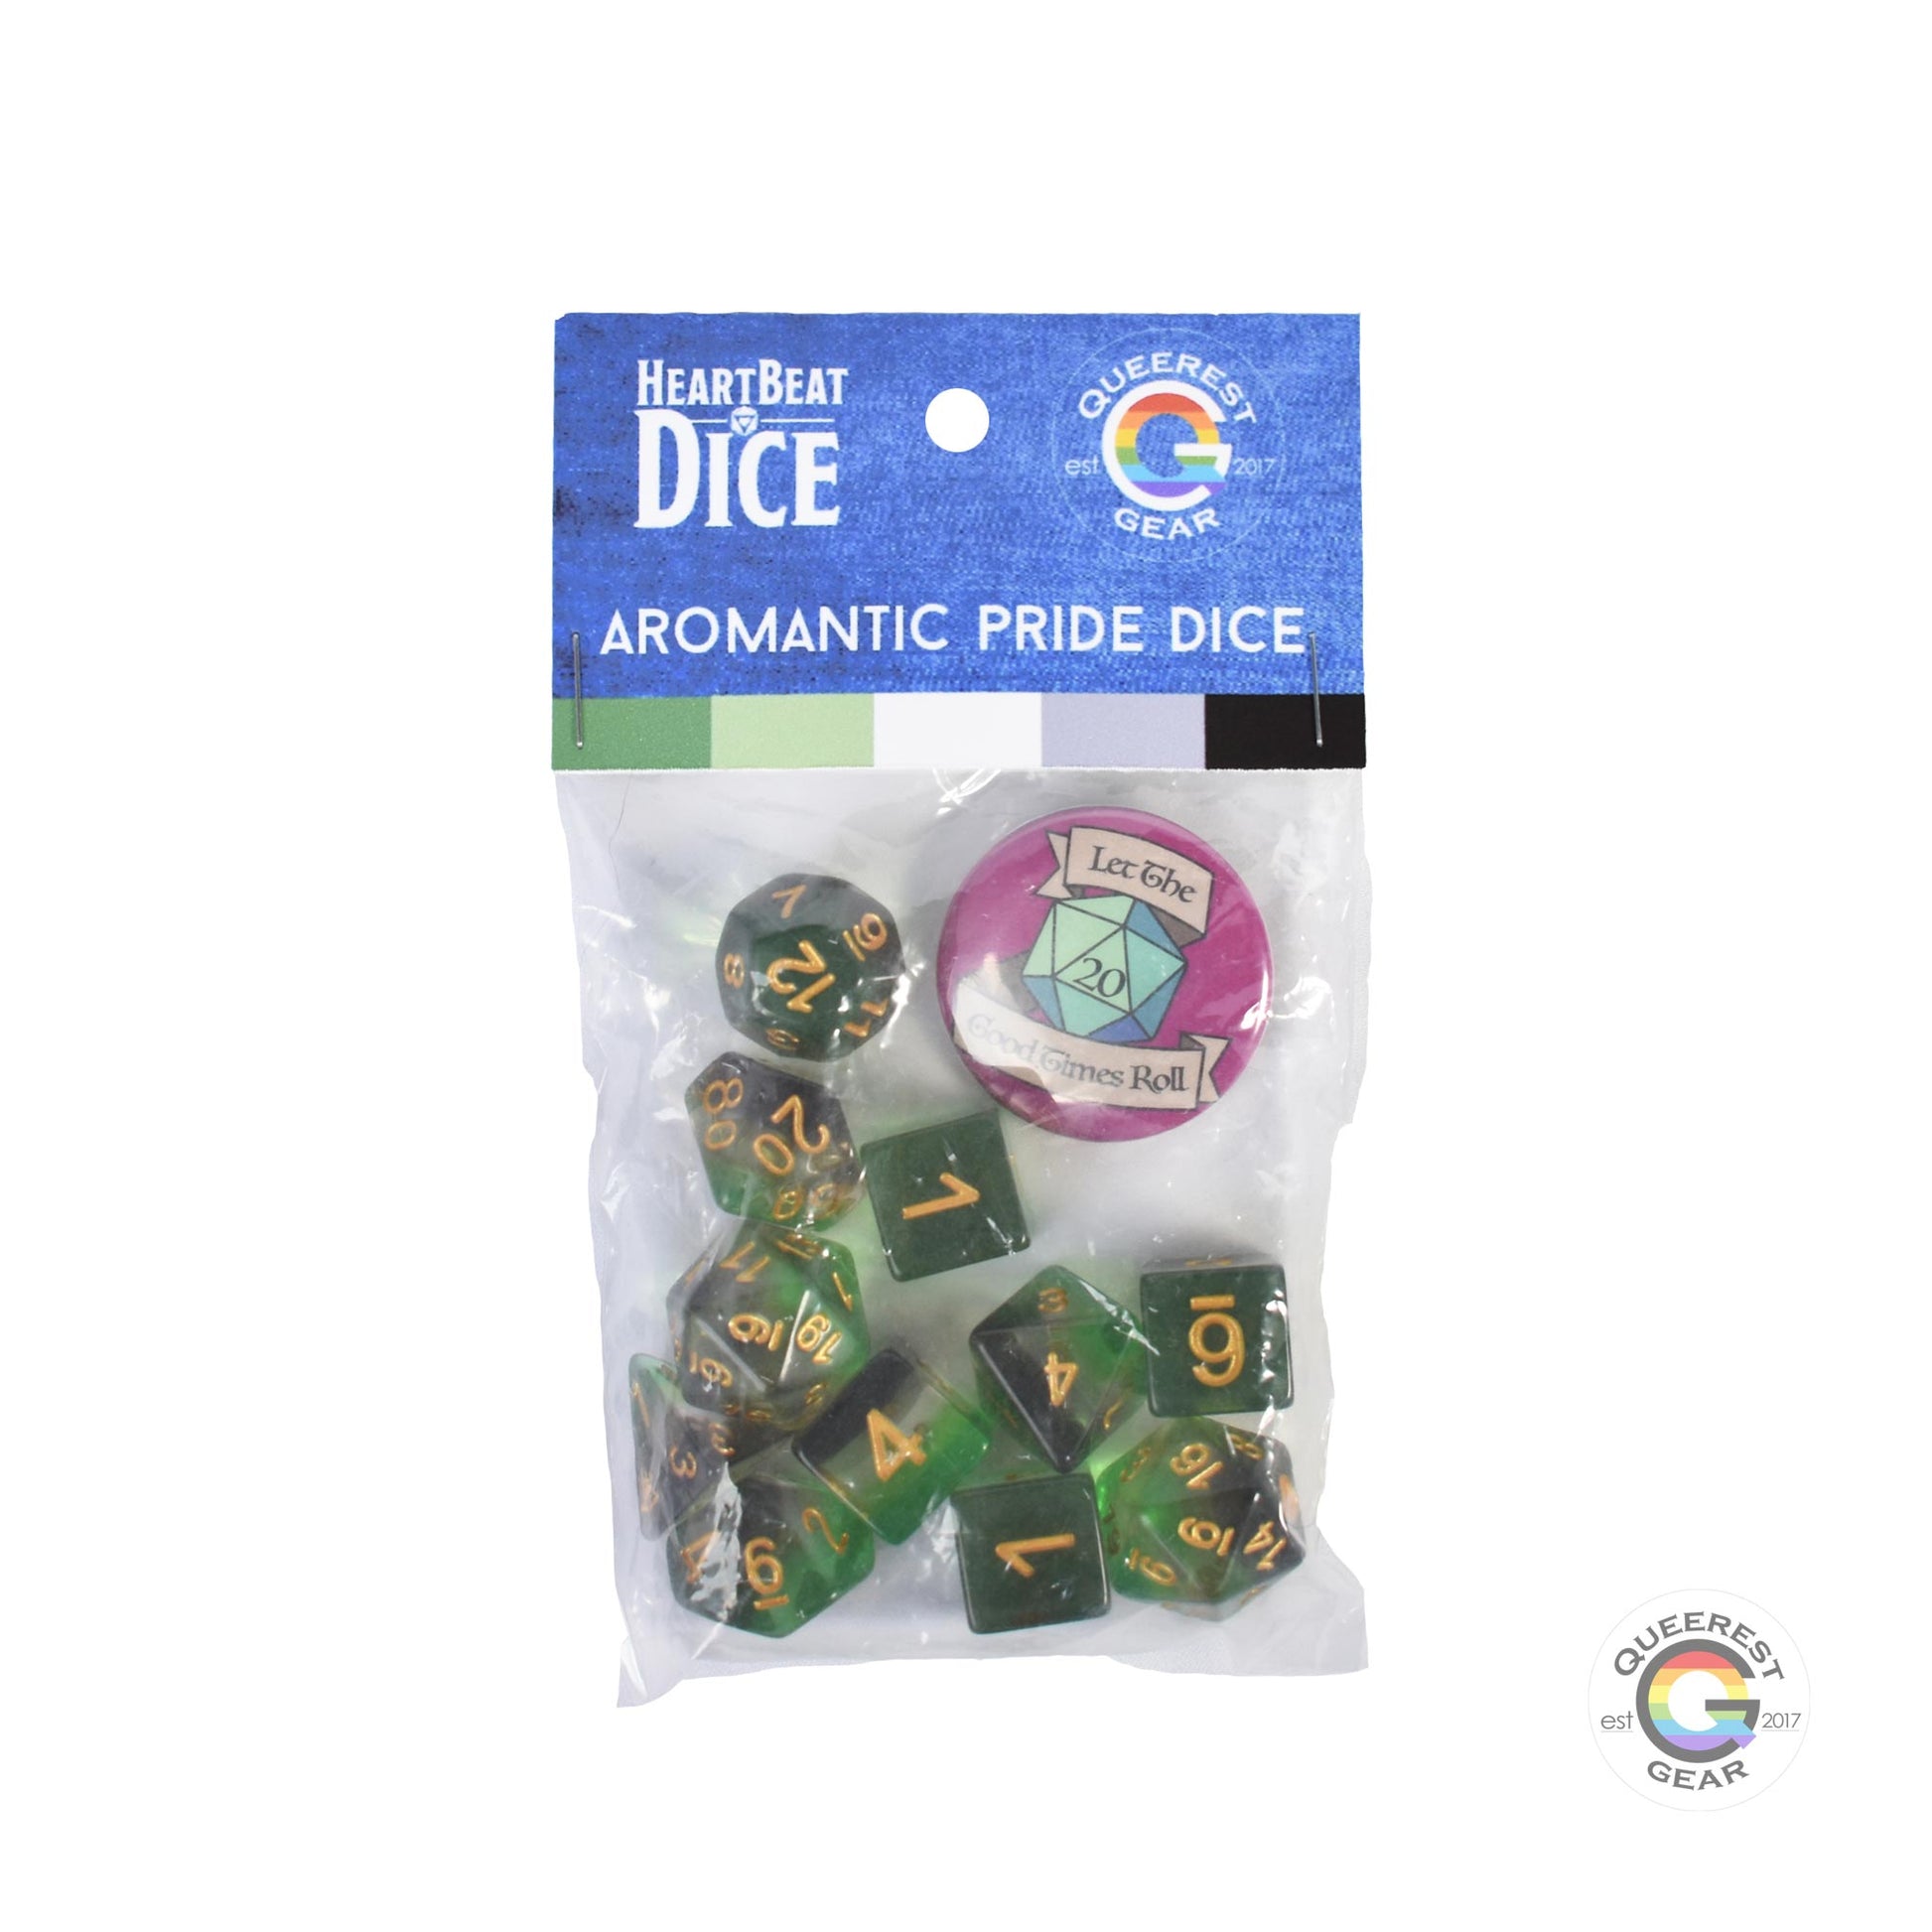 Aromantic pride dice in their packaging with a free “let the good times roll” button